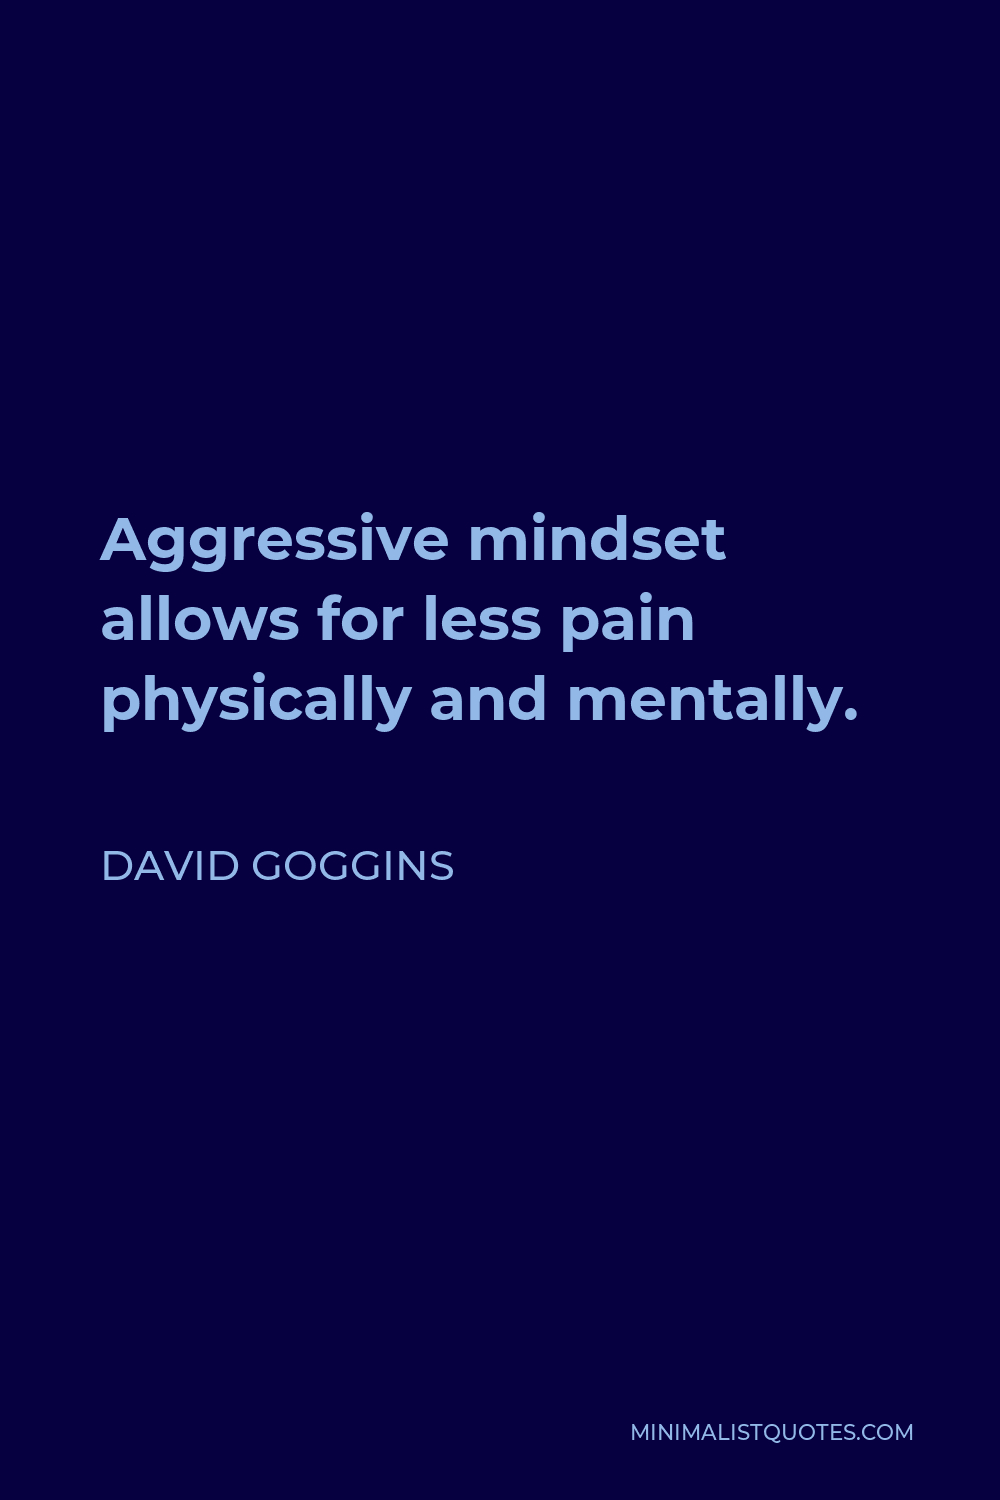 David Goggins Quote - Aggressive mindset allows for less pain physically and mentally.